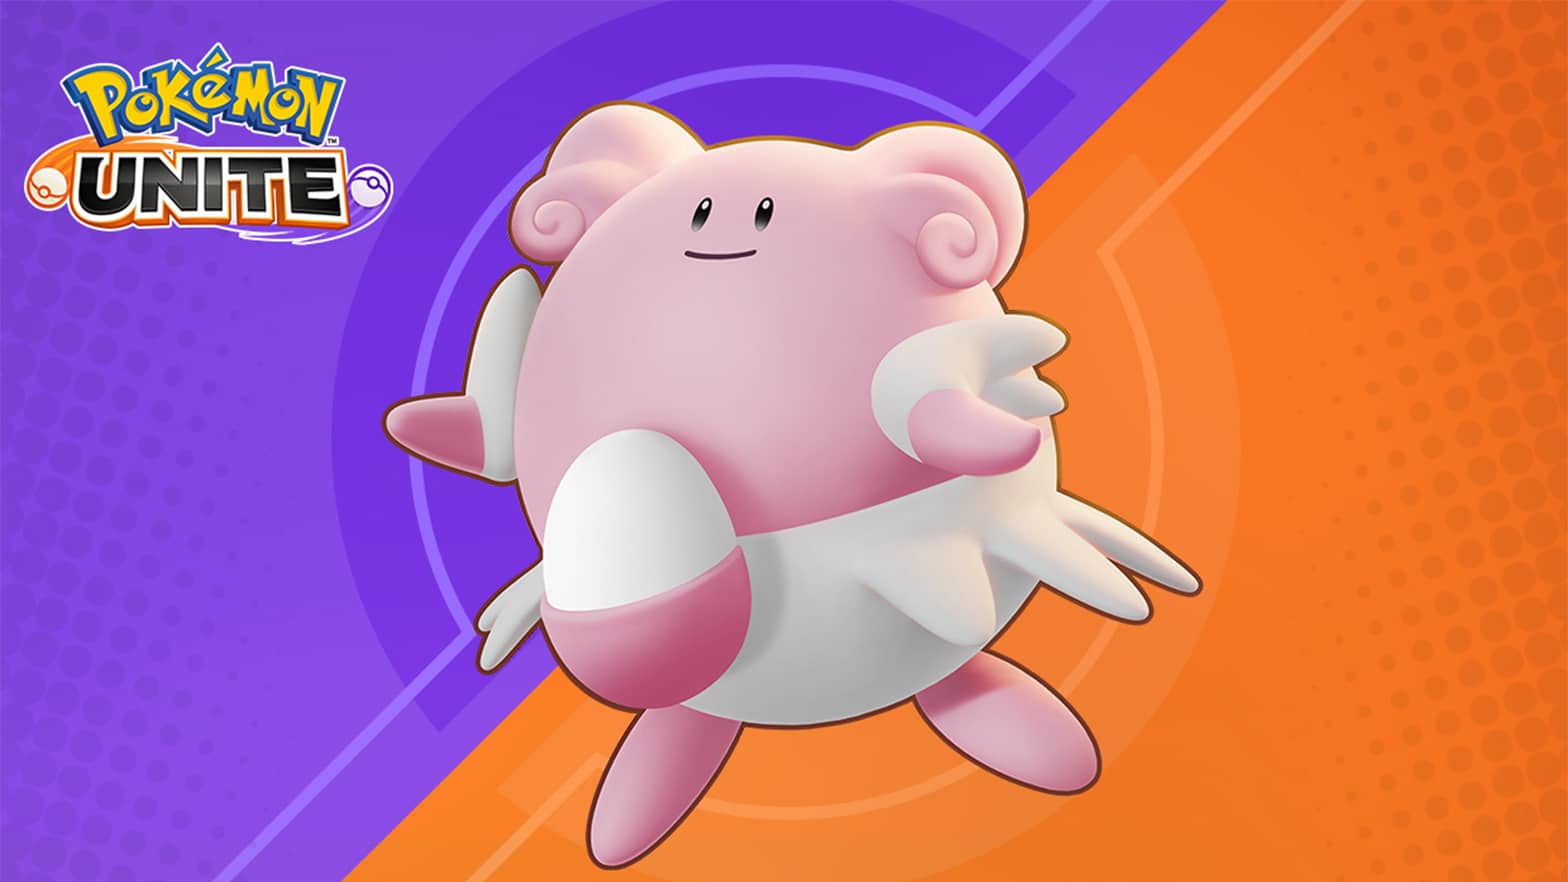 Pokemon Unite makes Blissey even stronger in the latest patch